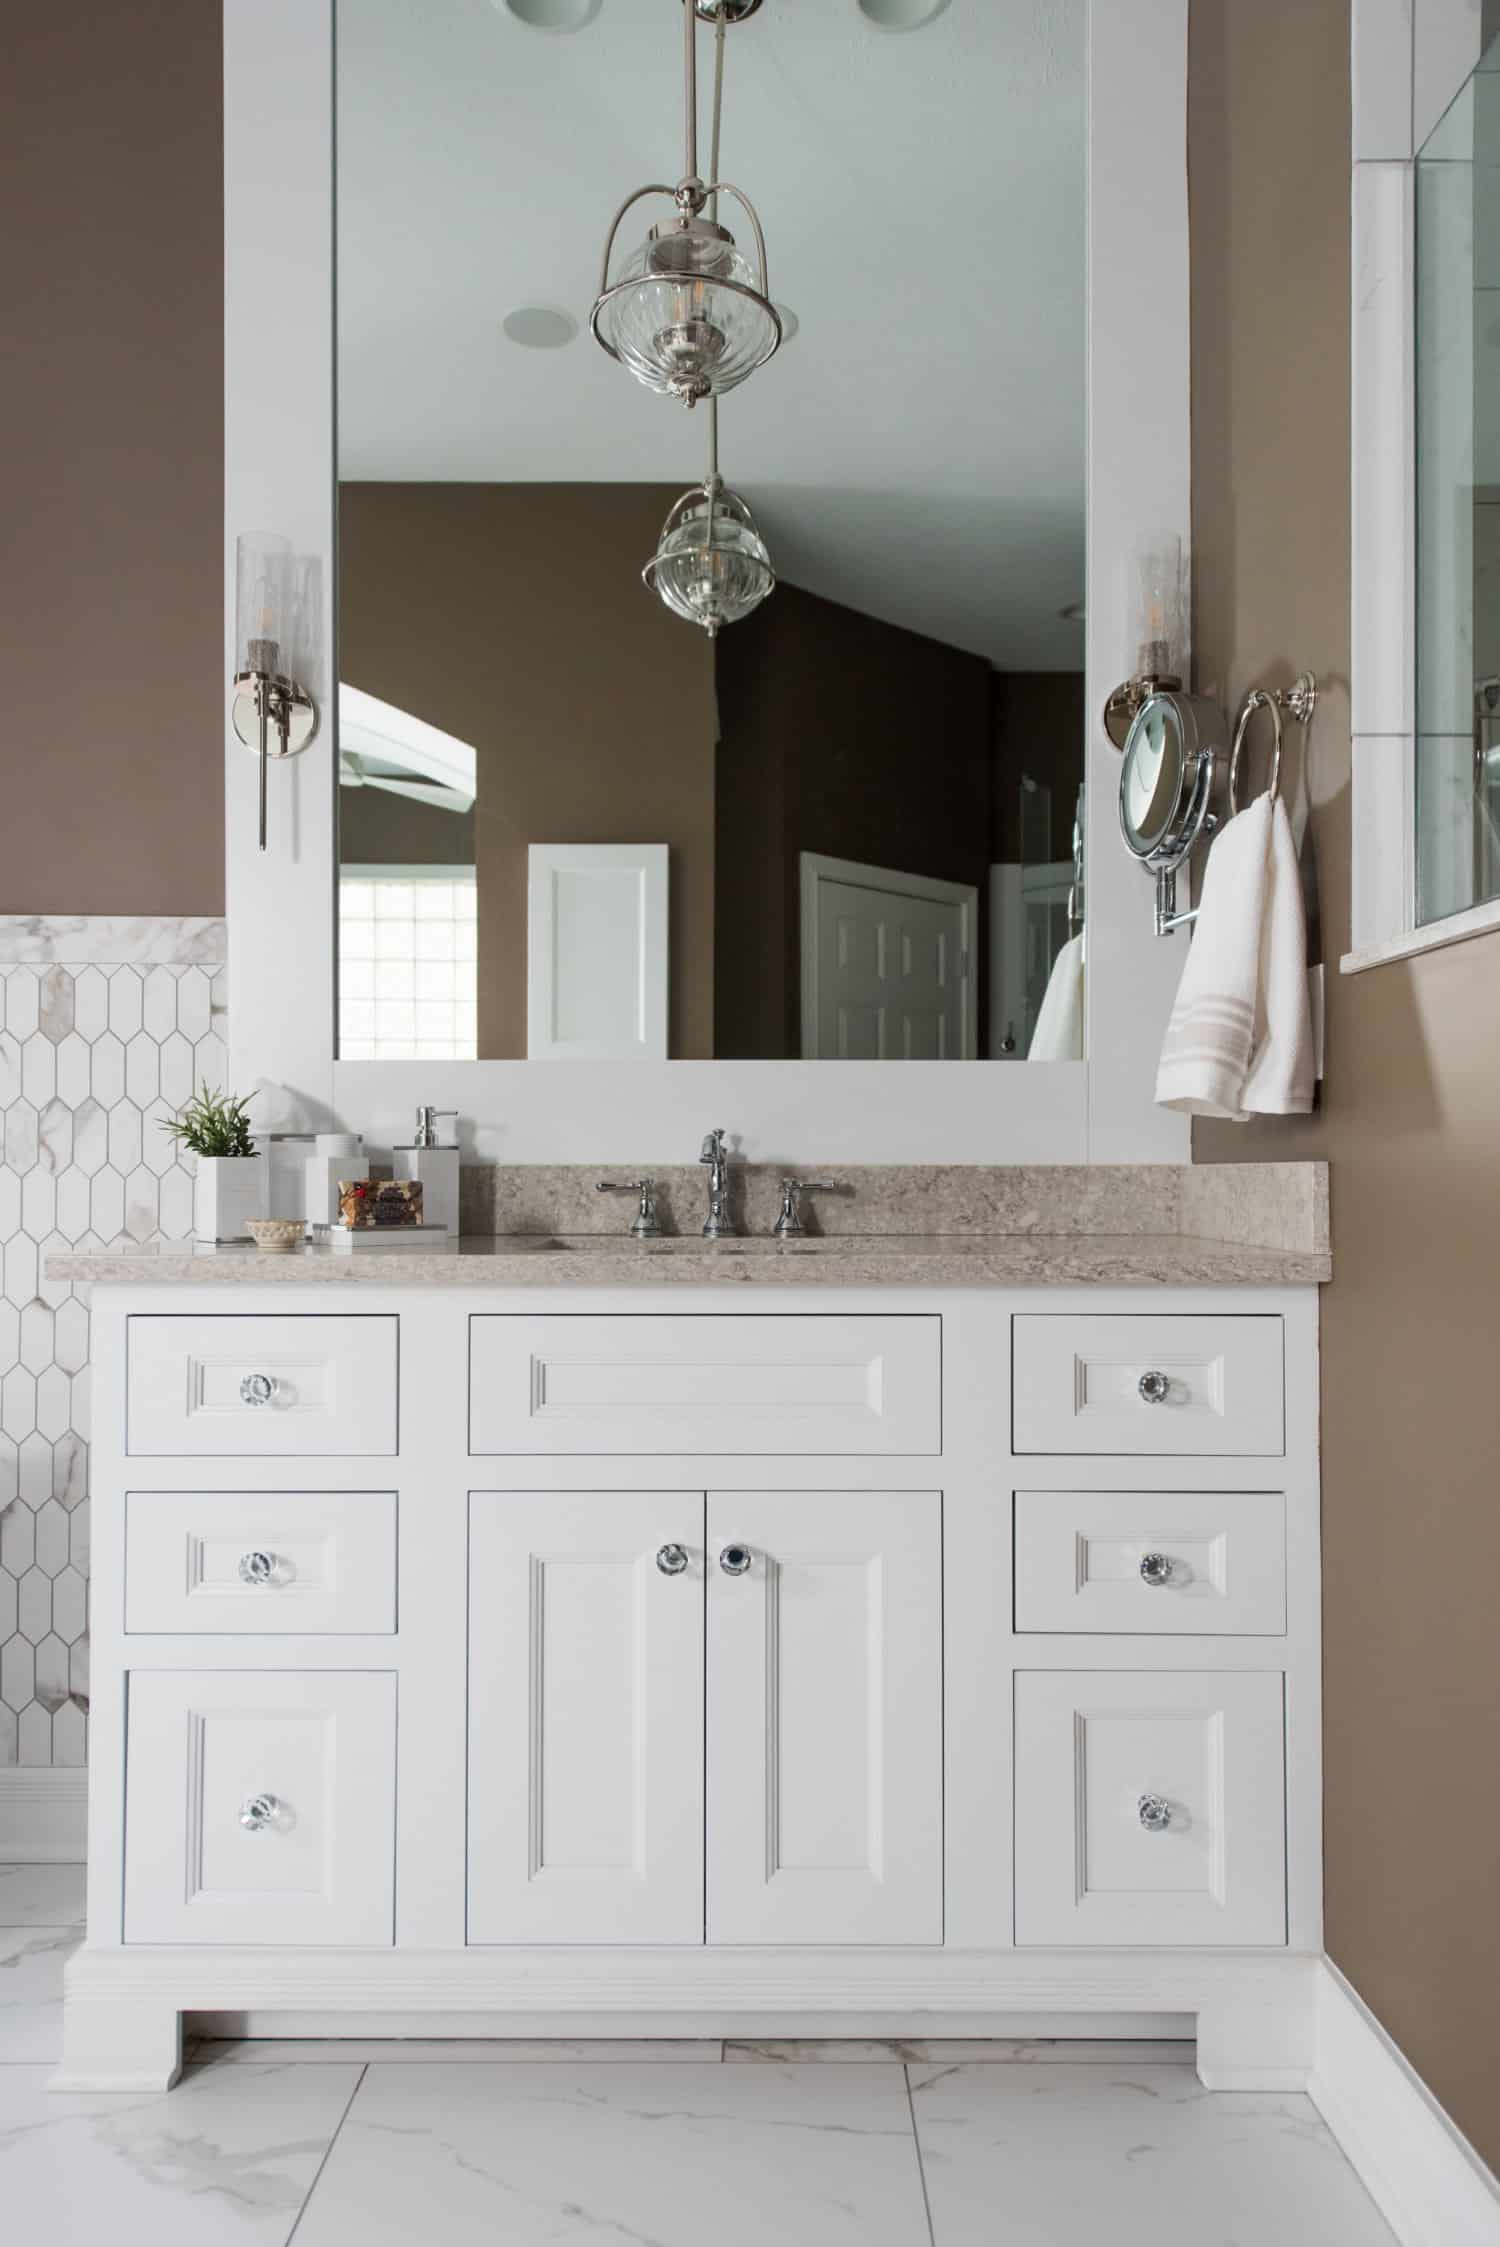 Nicholas Design Build | An oasis of tranquility, featuring a bathroom with white cabinets and a mirror.